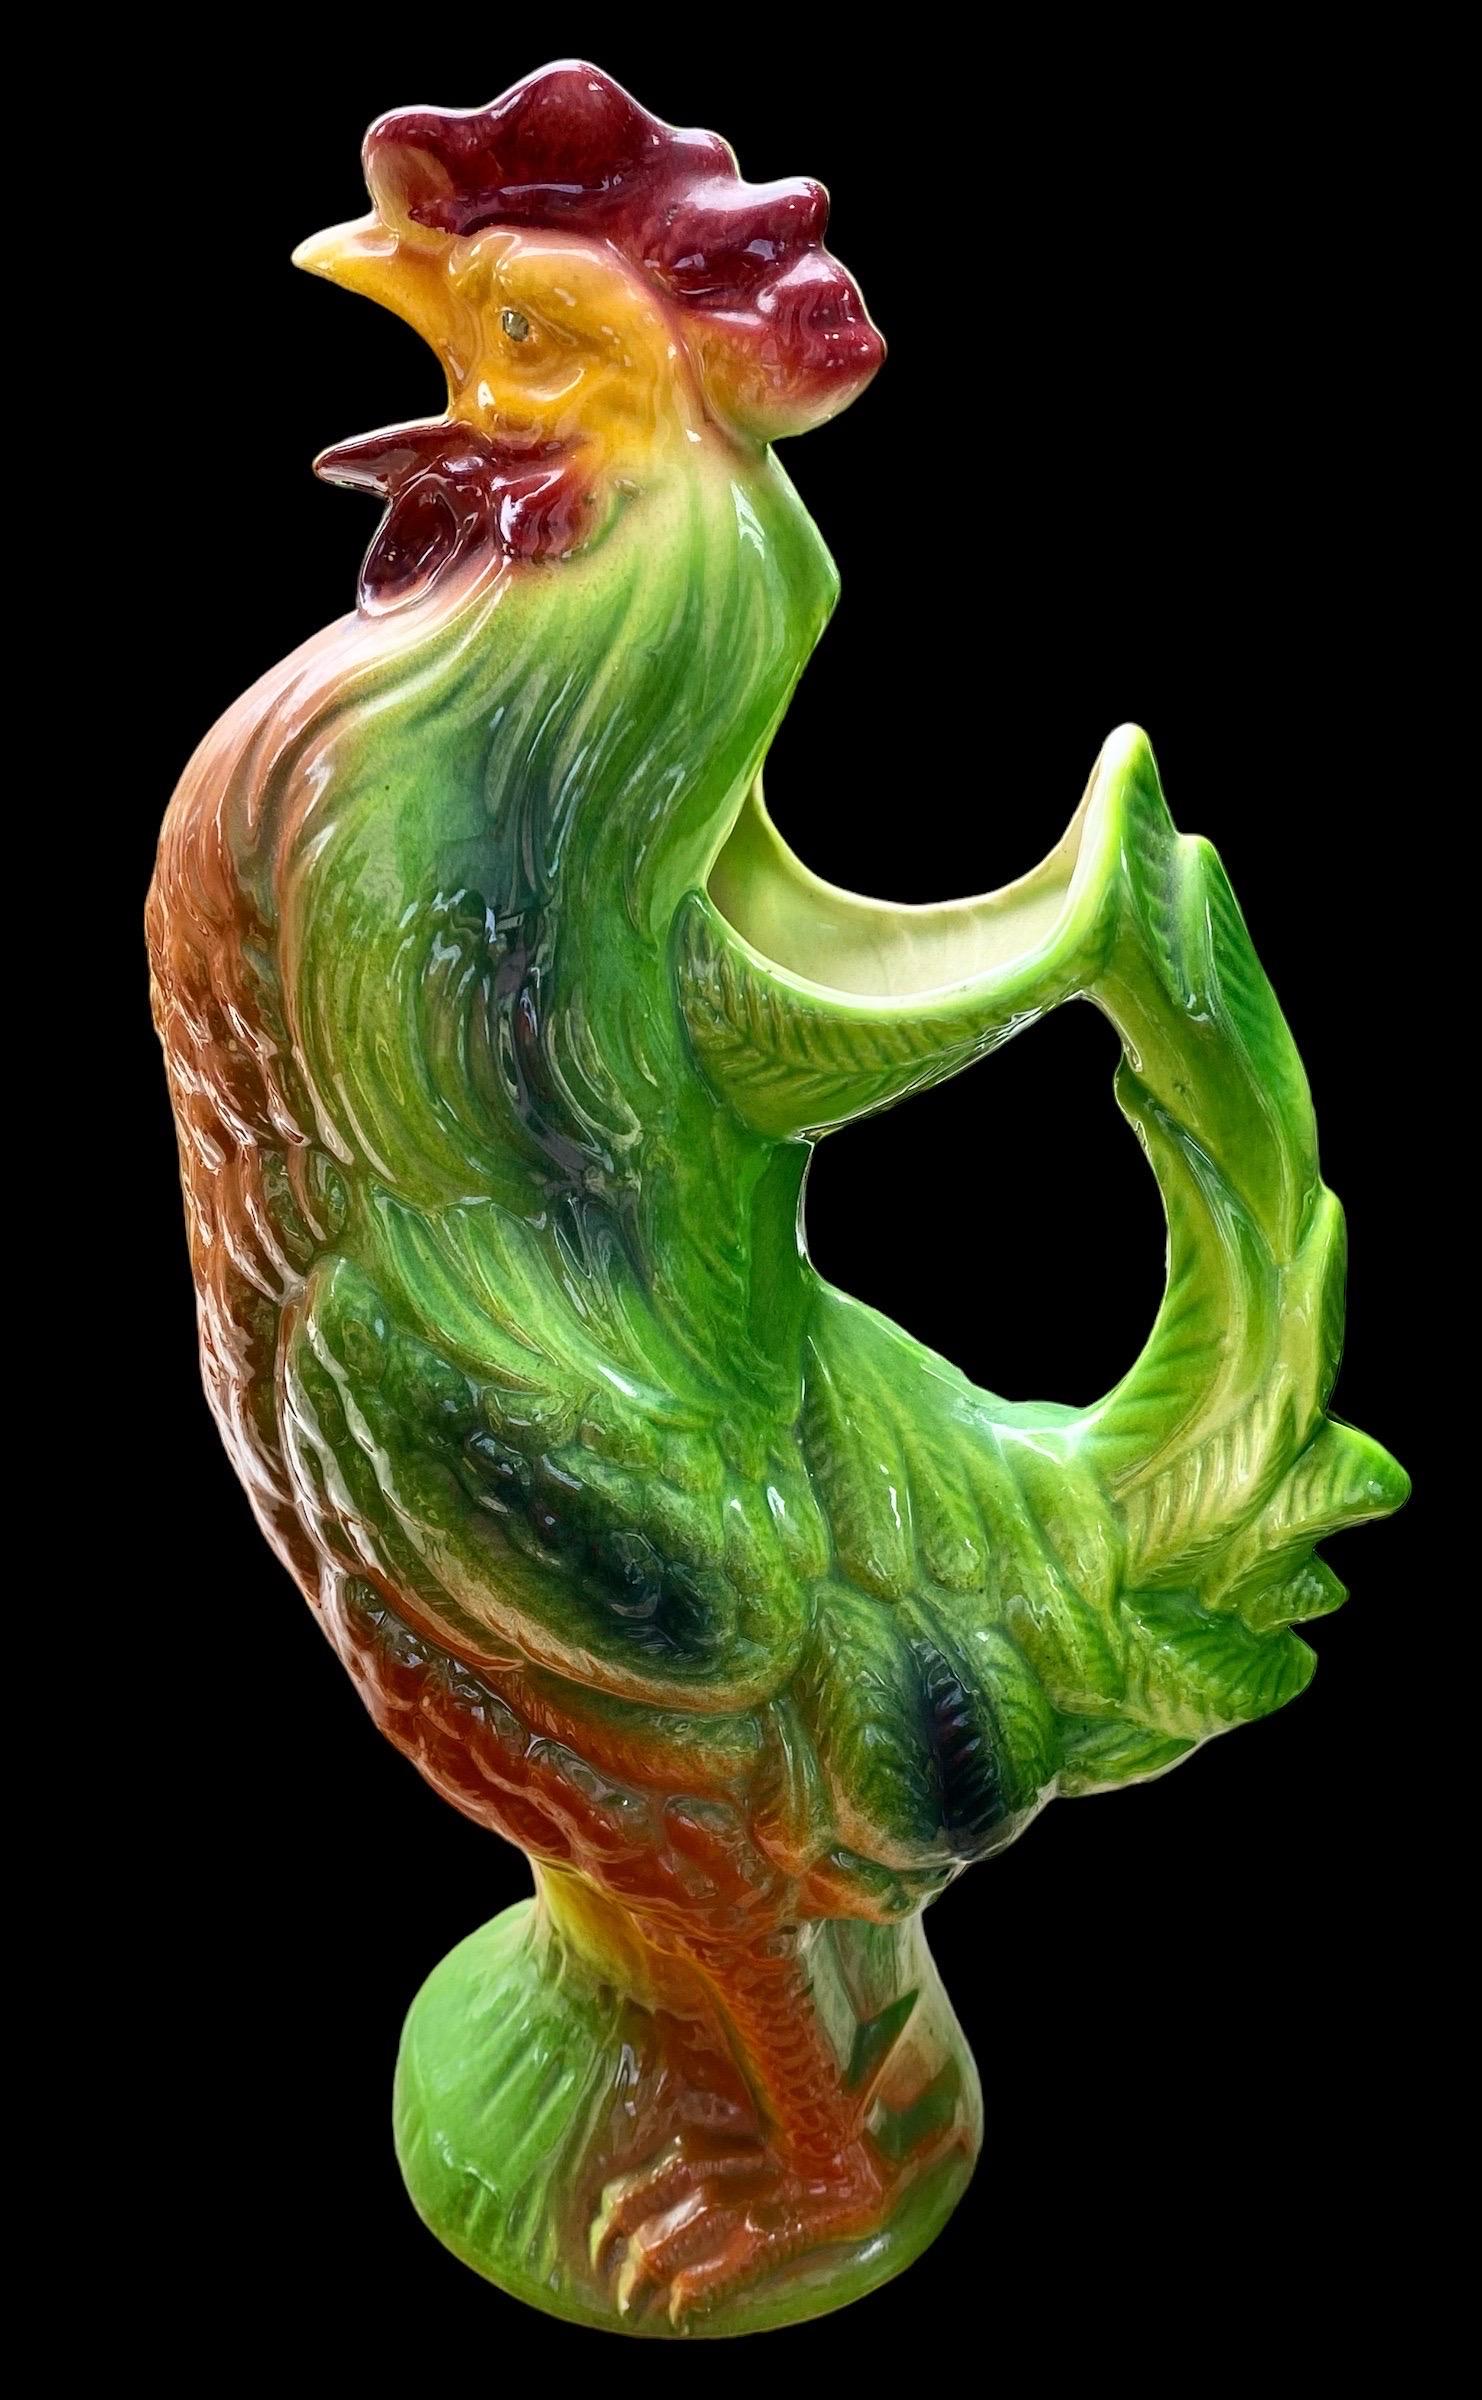 A antique French Art Nouveau Majolica glazed Absinthe water pitcher formed as a rooster, St. Clément. The Gallic rooster, in French: le coq gaulois, is an unofficial national symbol of France.
This earthenware Barbotine majolica pitcher is brightly